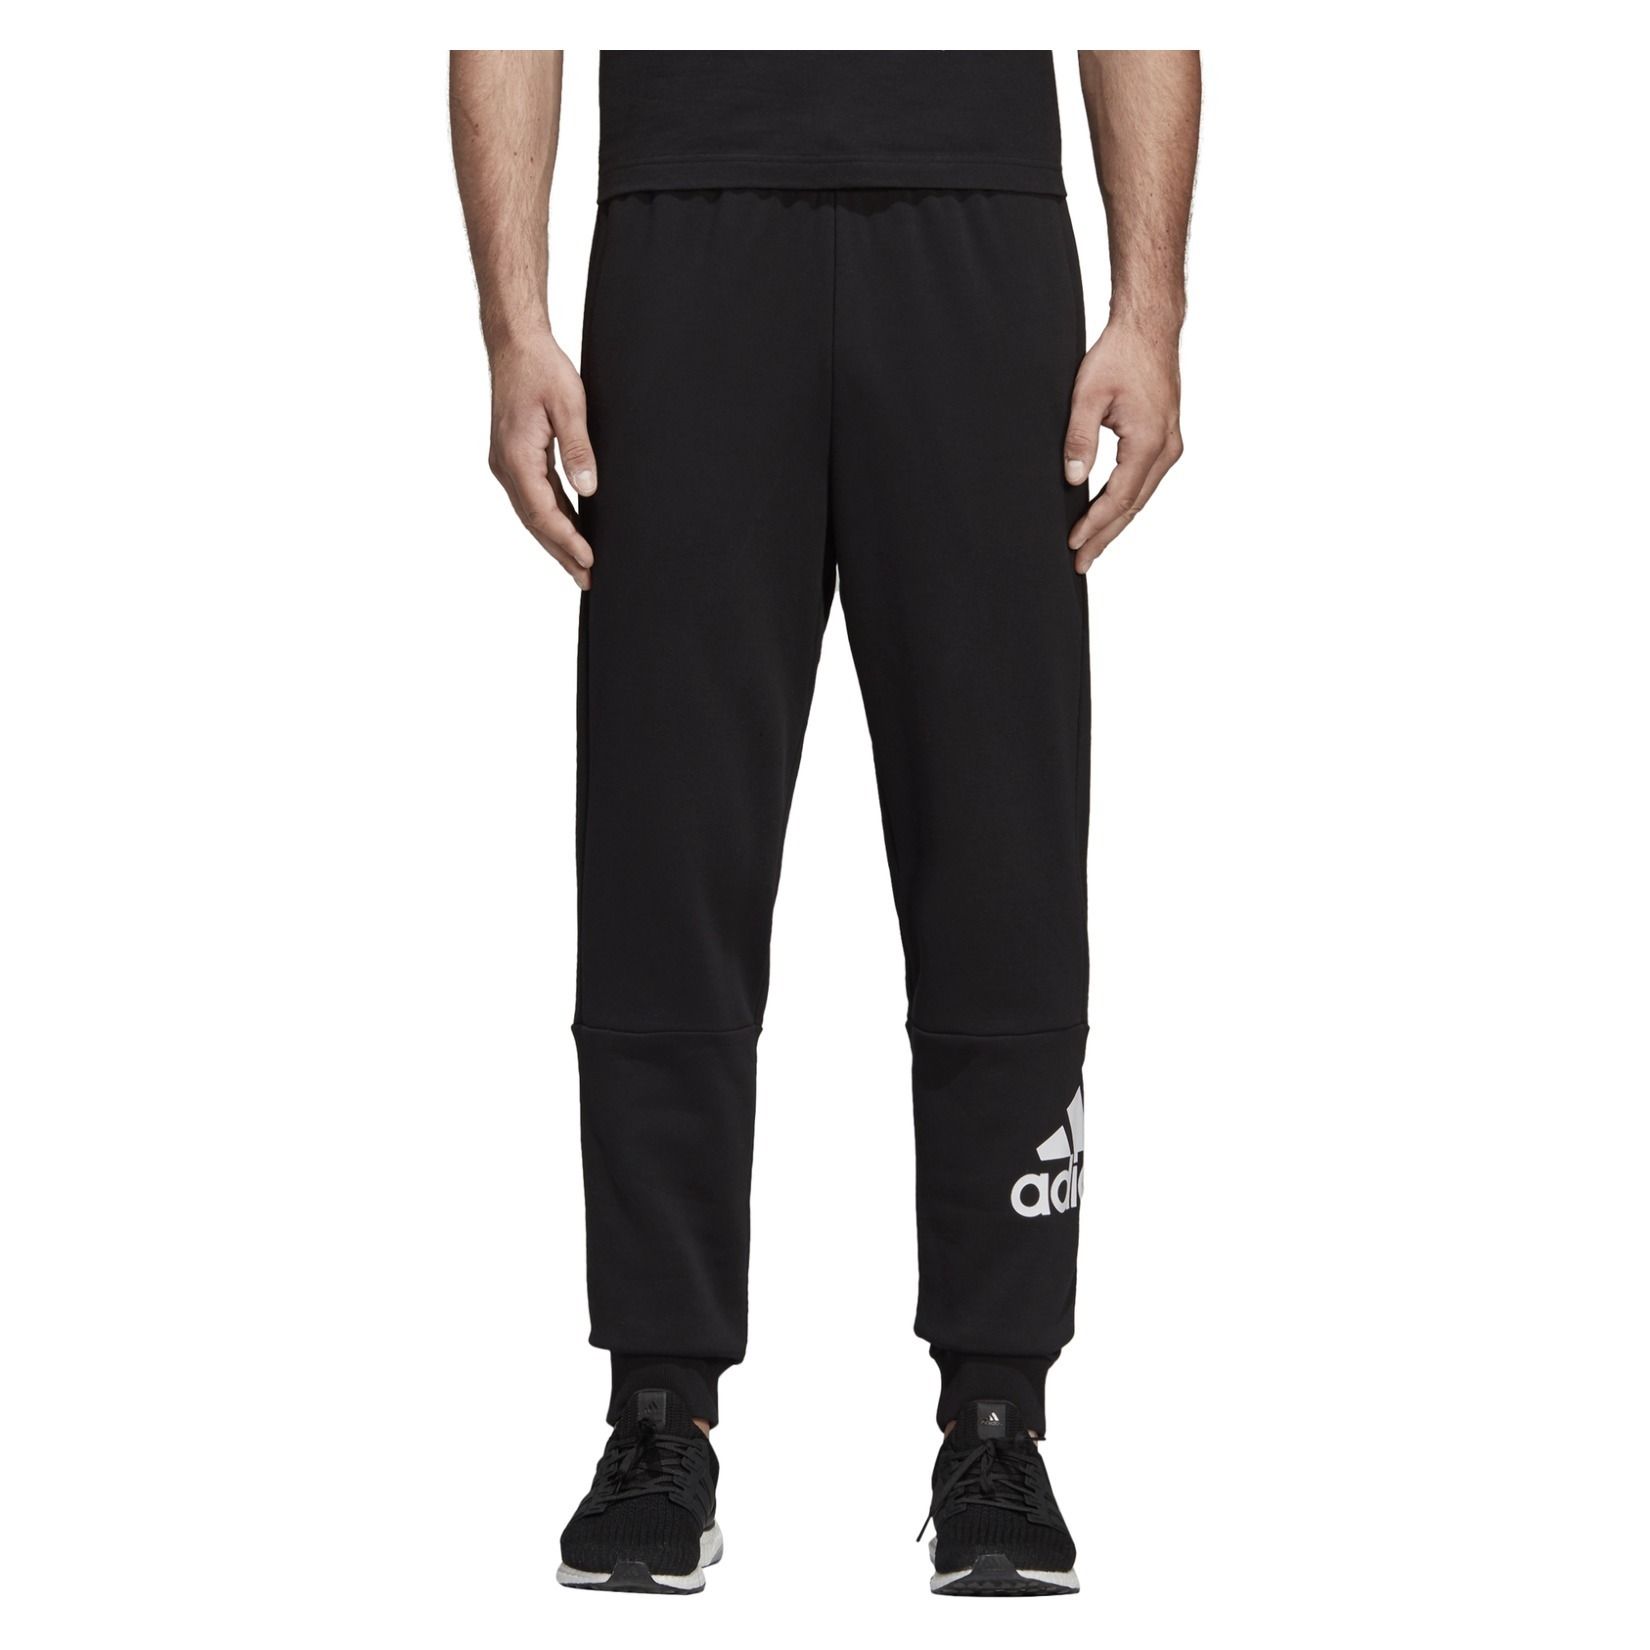 sport french terry pants adidas